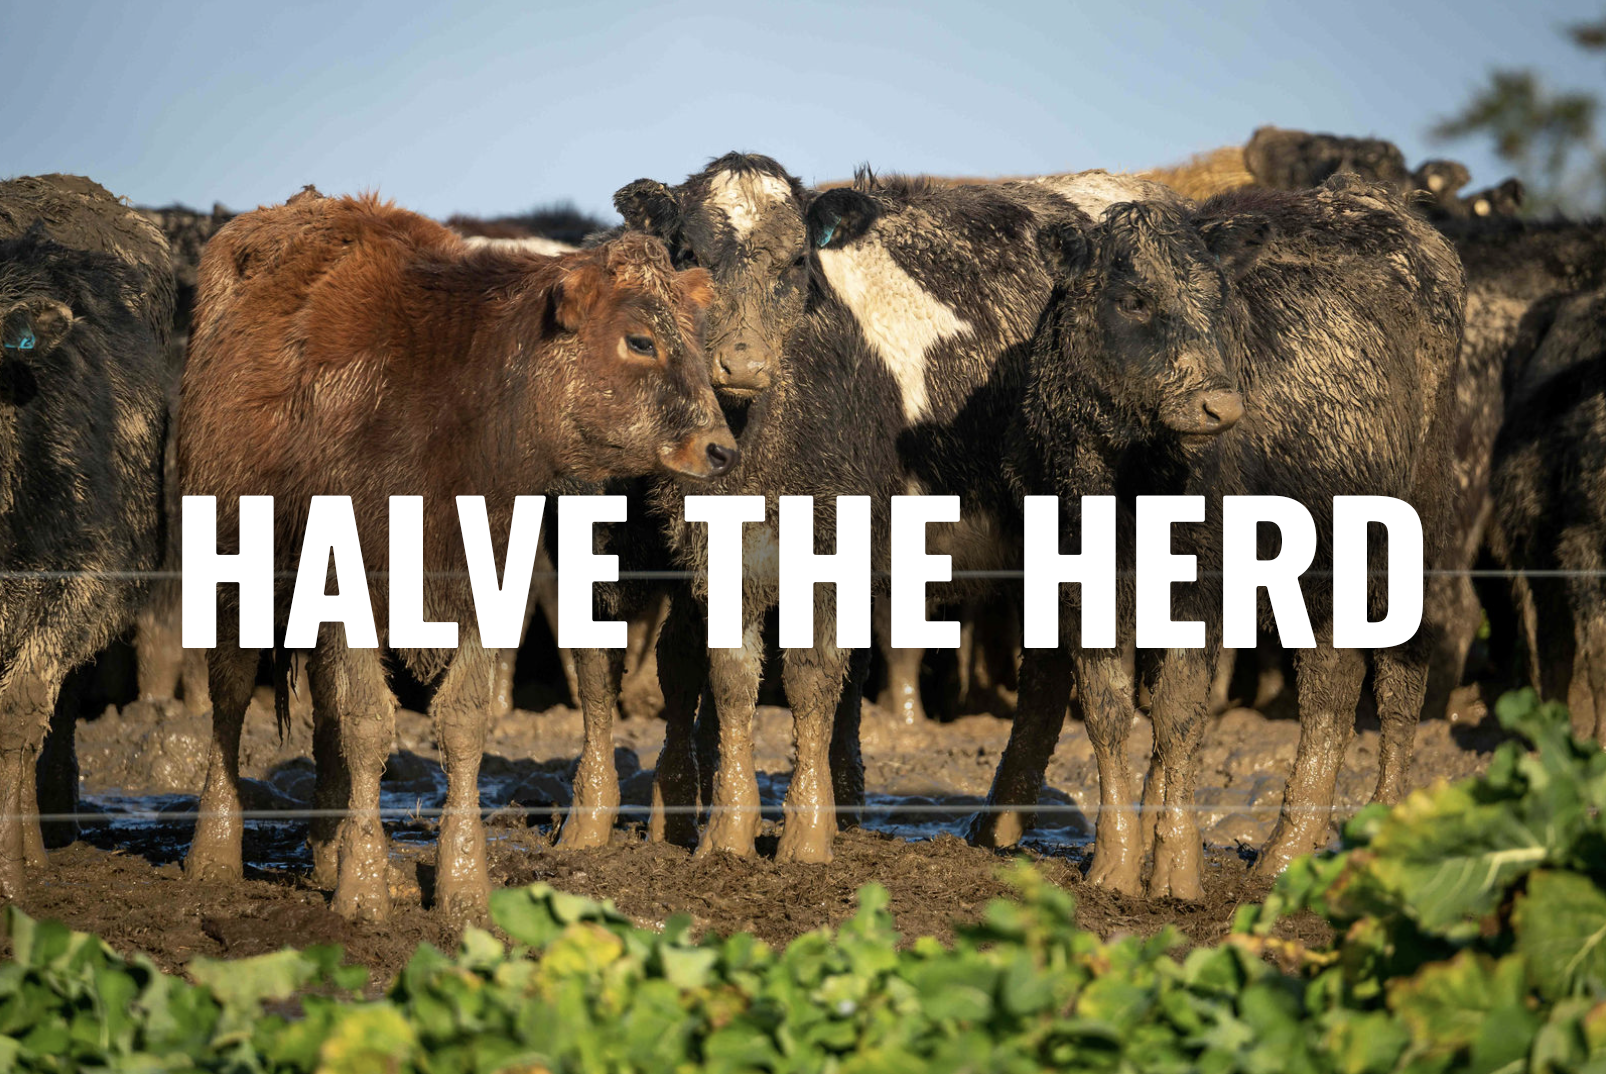 Image of cows behind the words "Halve the herd"